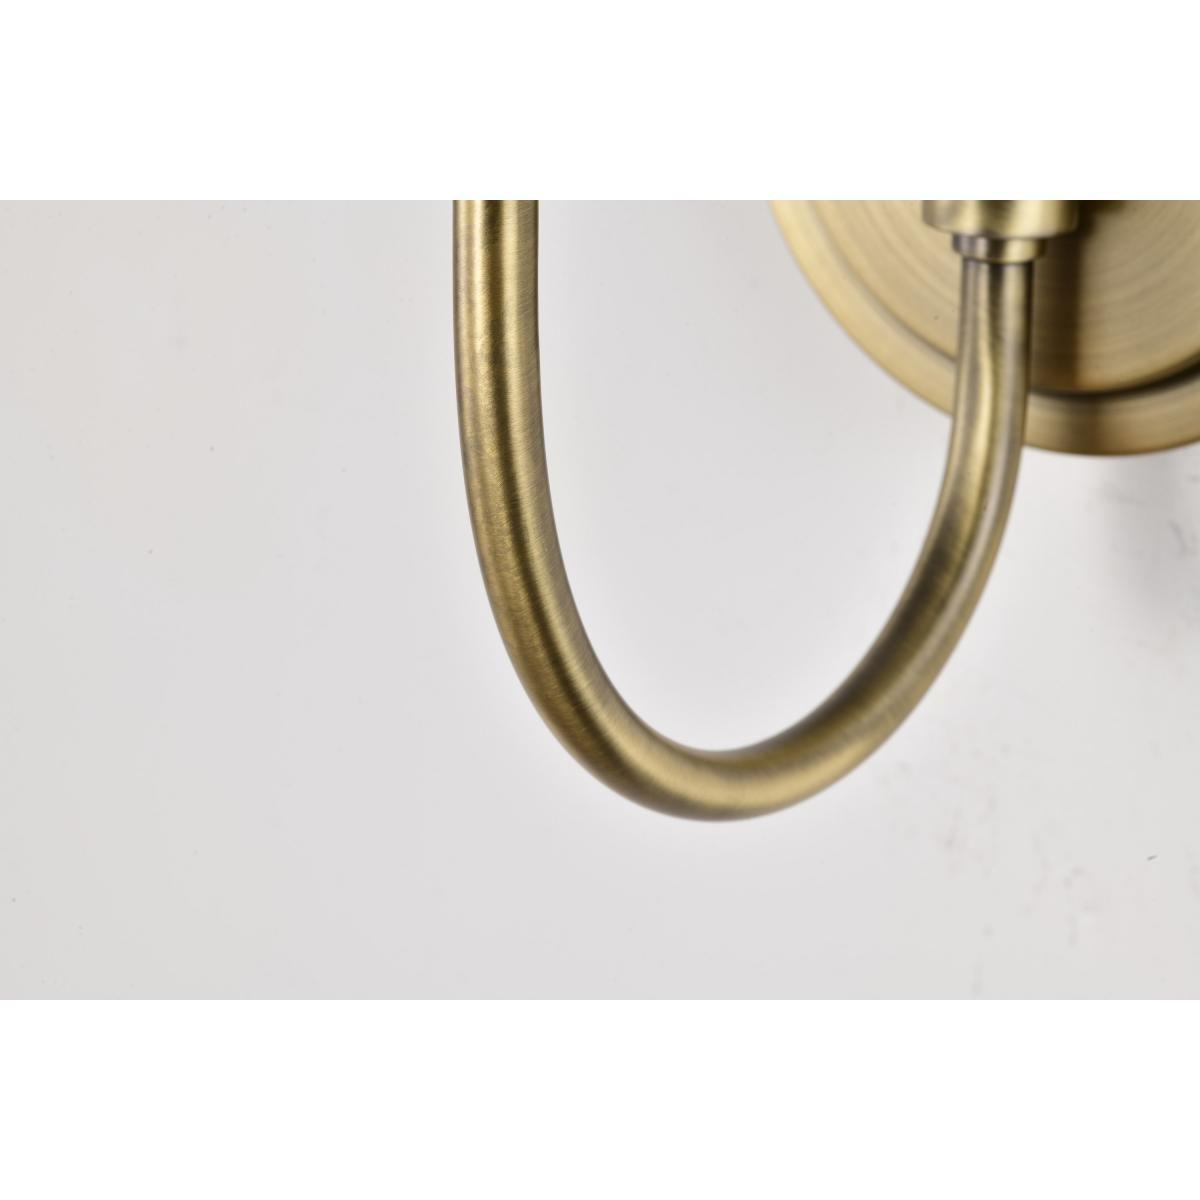 Brookside 12 in. Wall Sconce Vintage Brass Finish